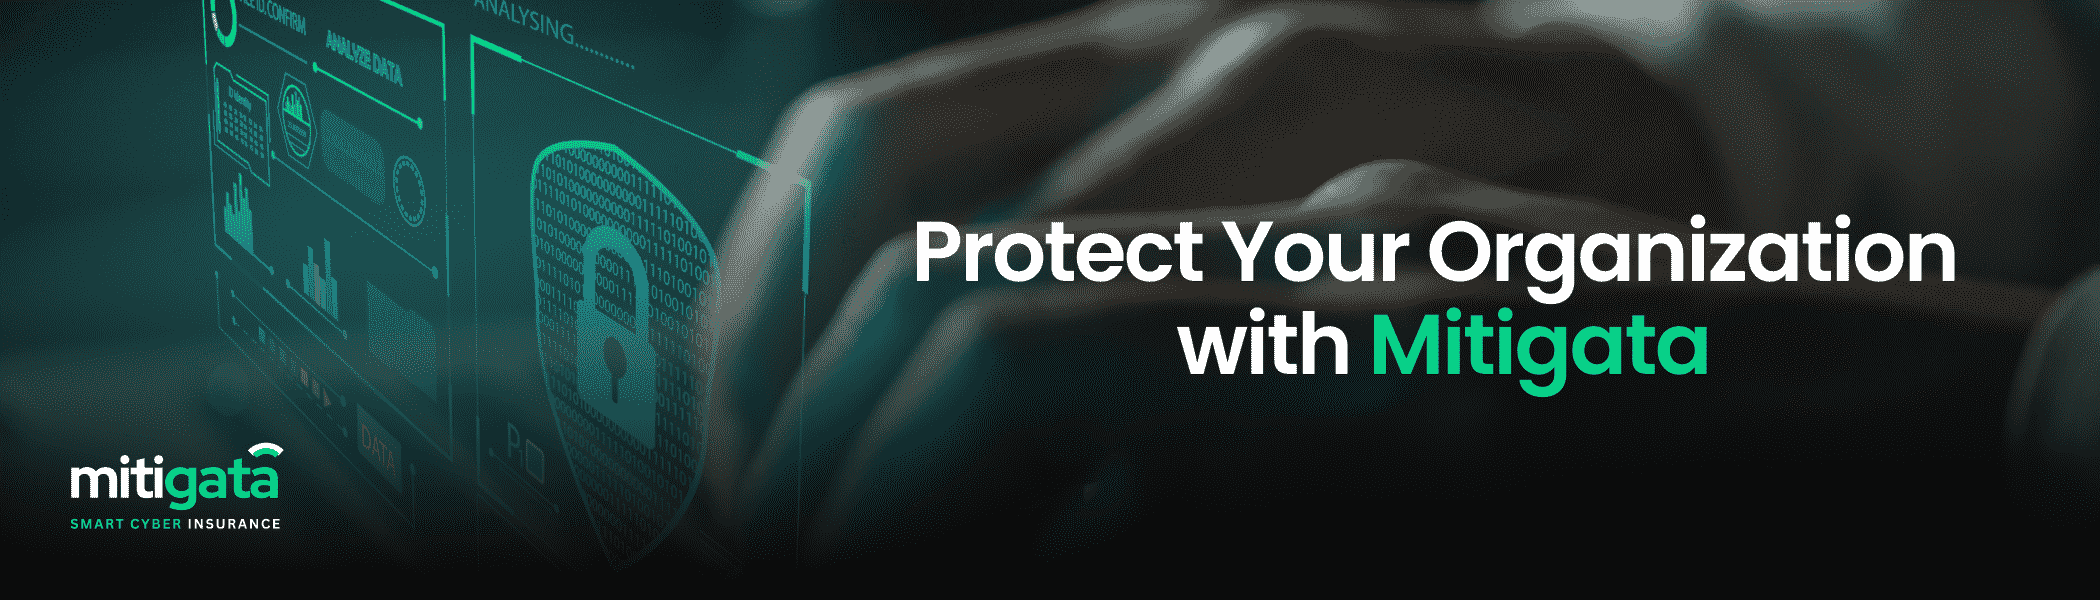 Protect your organization with Mitigtata